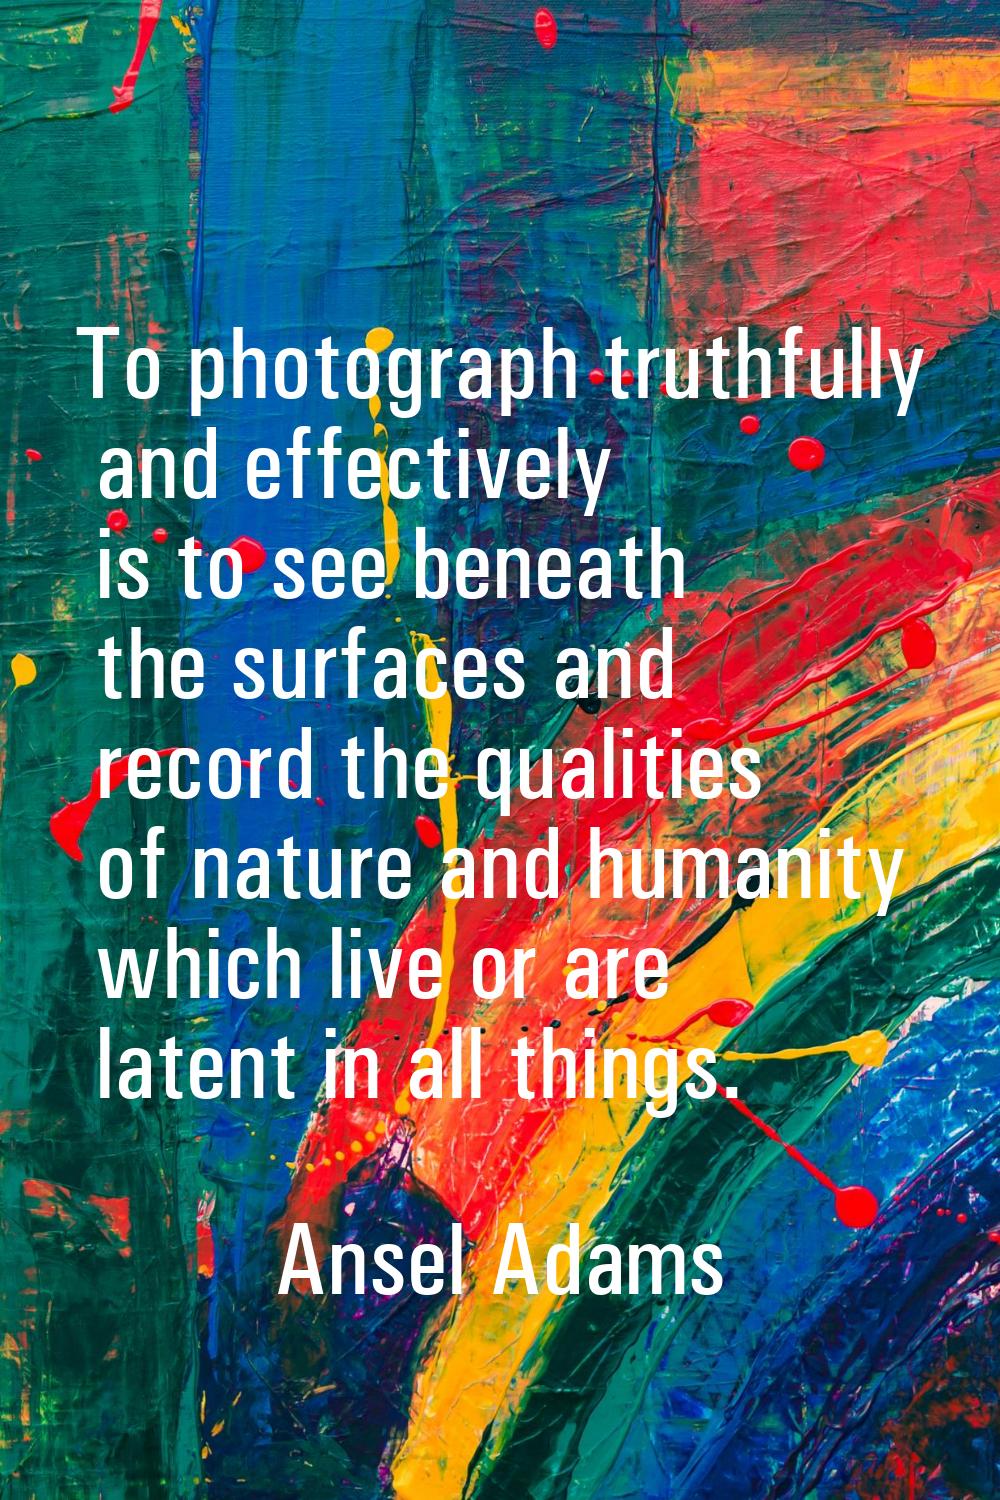 To photograph truthfully and effectively is to see beneath the surfaces and record the qualities of